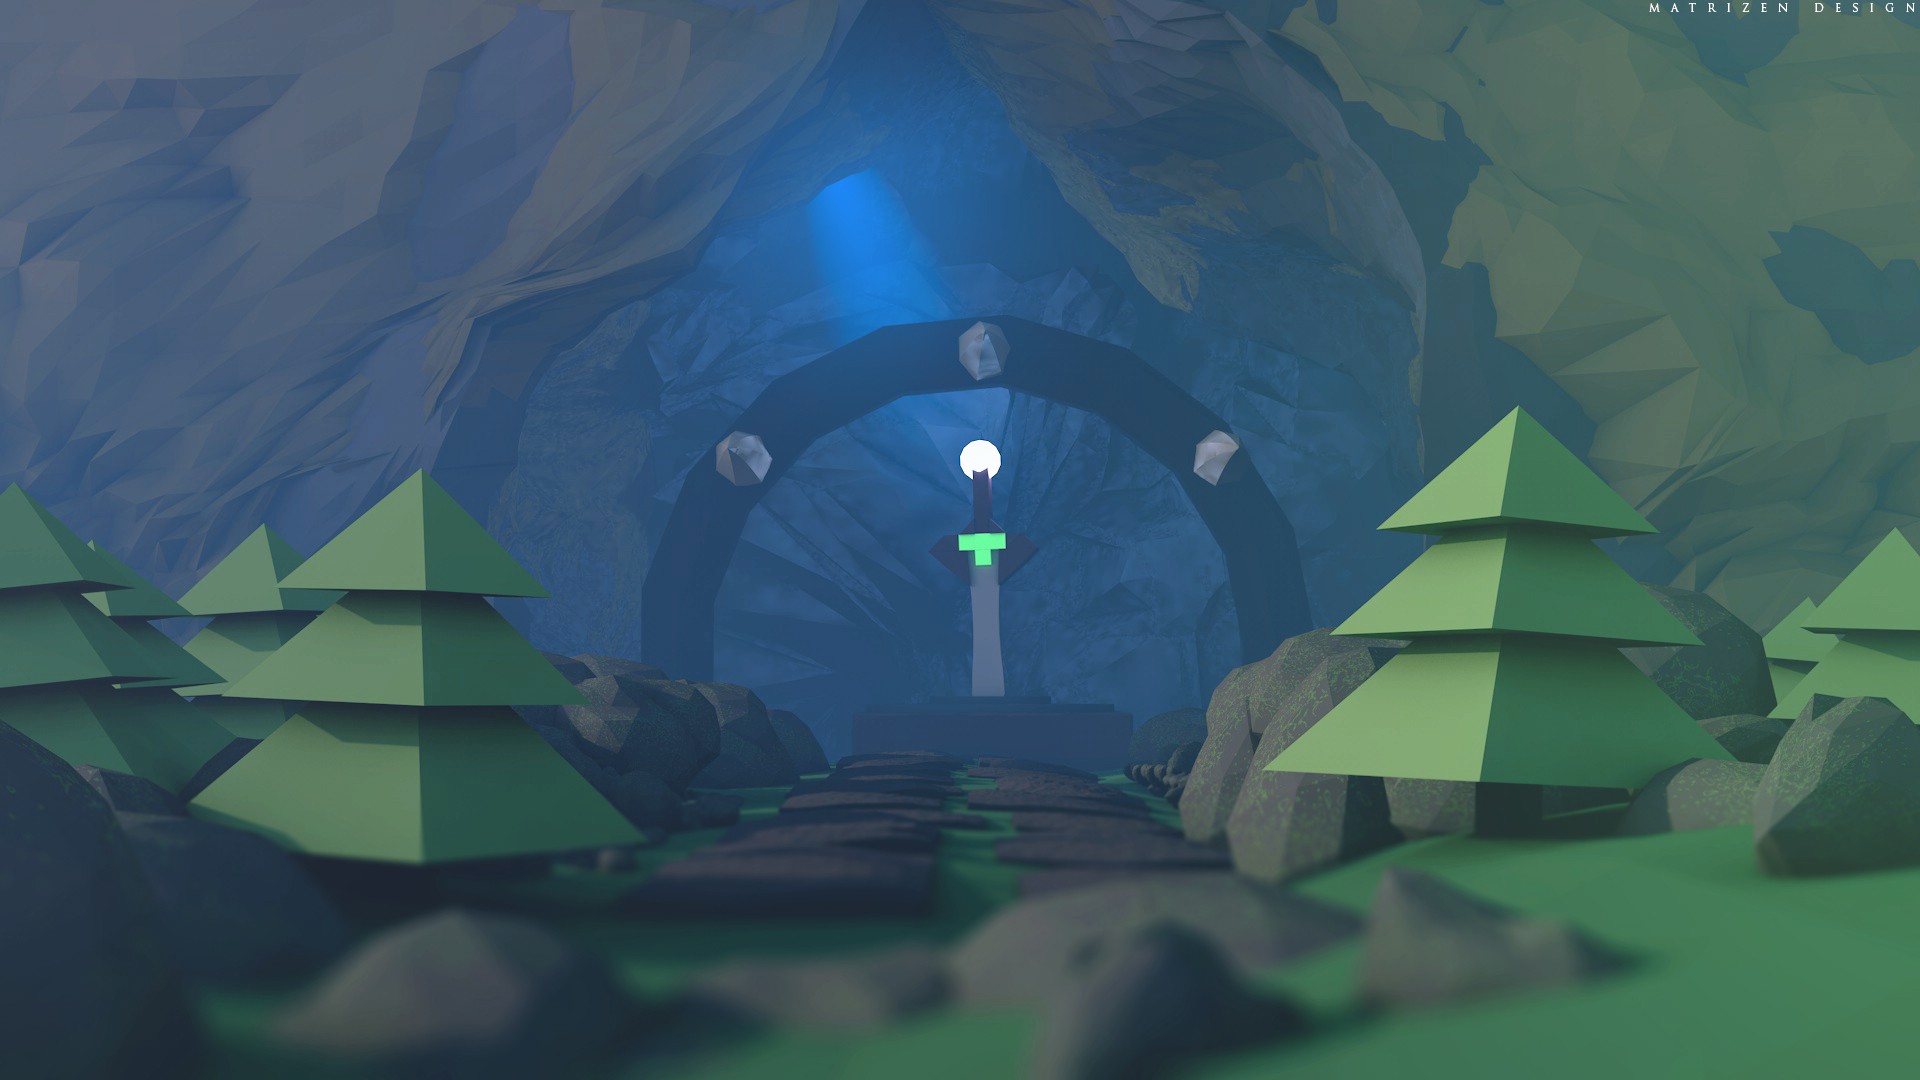 low poly, Trees, Mountains, Cave in, Cave, Sword, Lights, 3d object, Sphere, Stones, Depth of field, Digital art, 3D, 3D Blocks, Material style, Cinema 4D Wallpaper